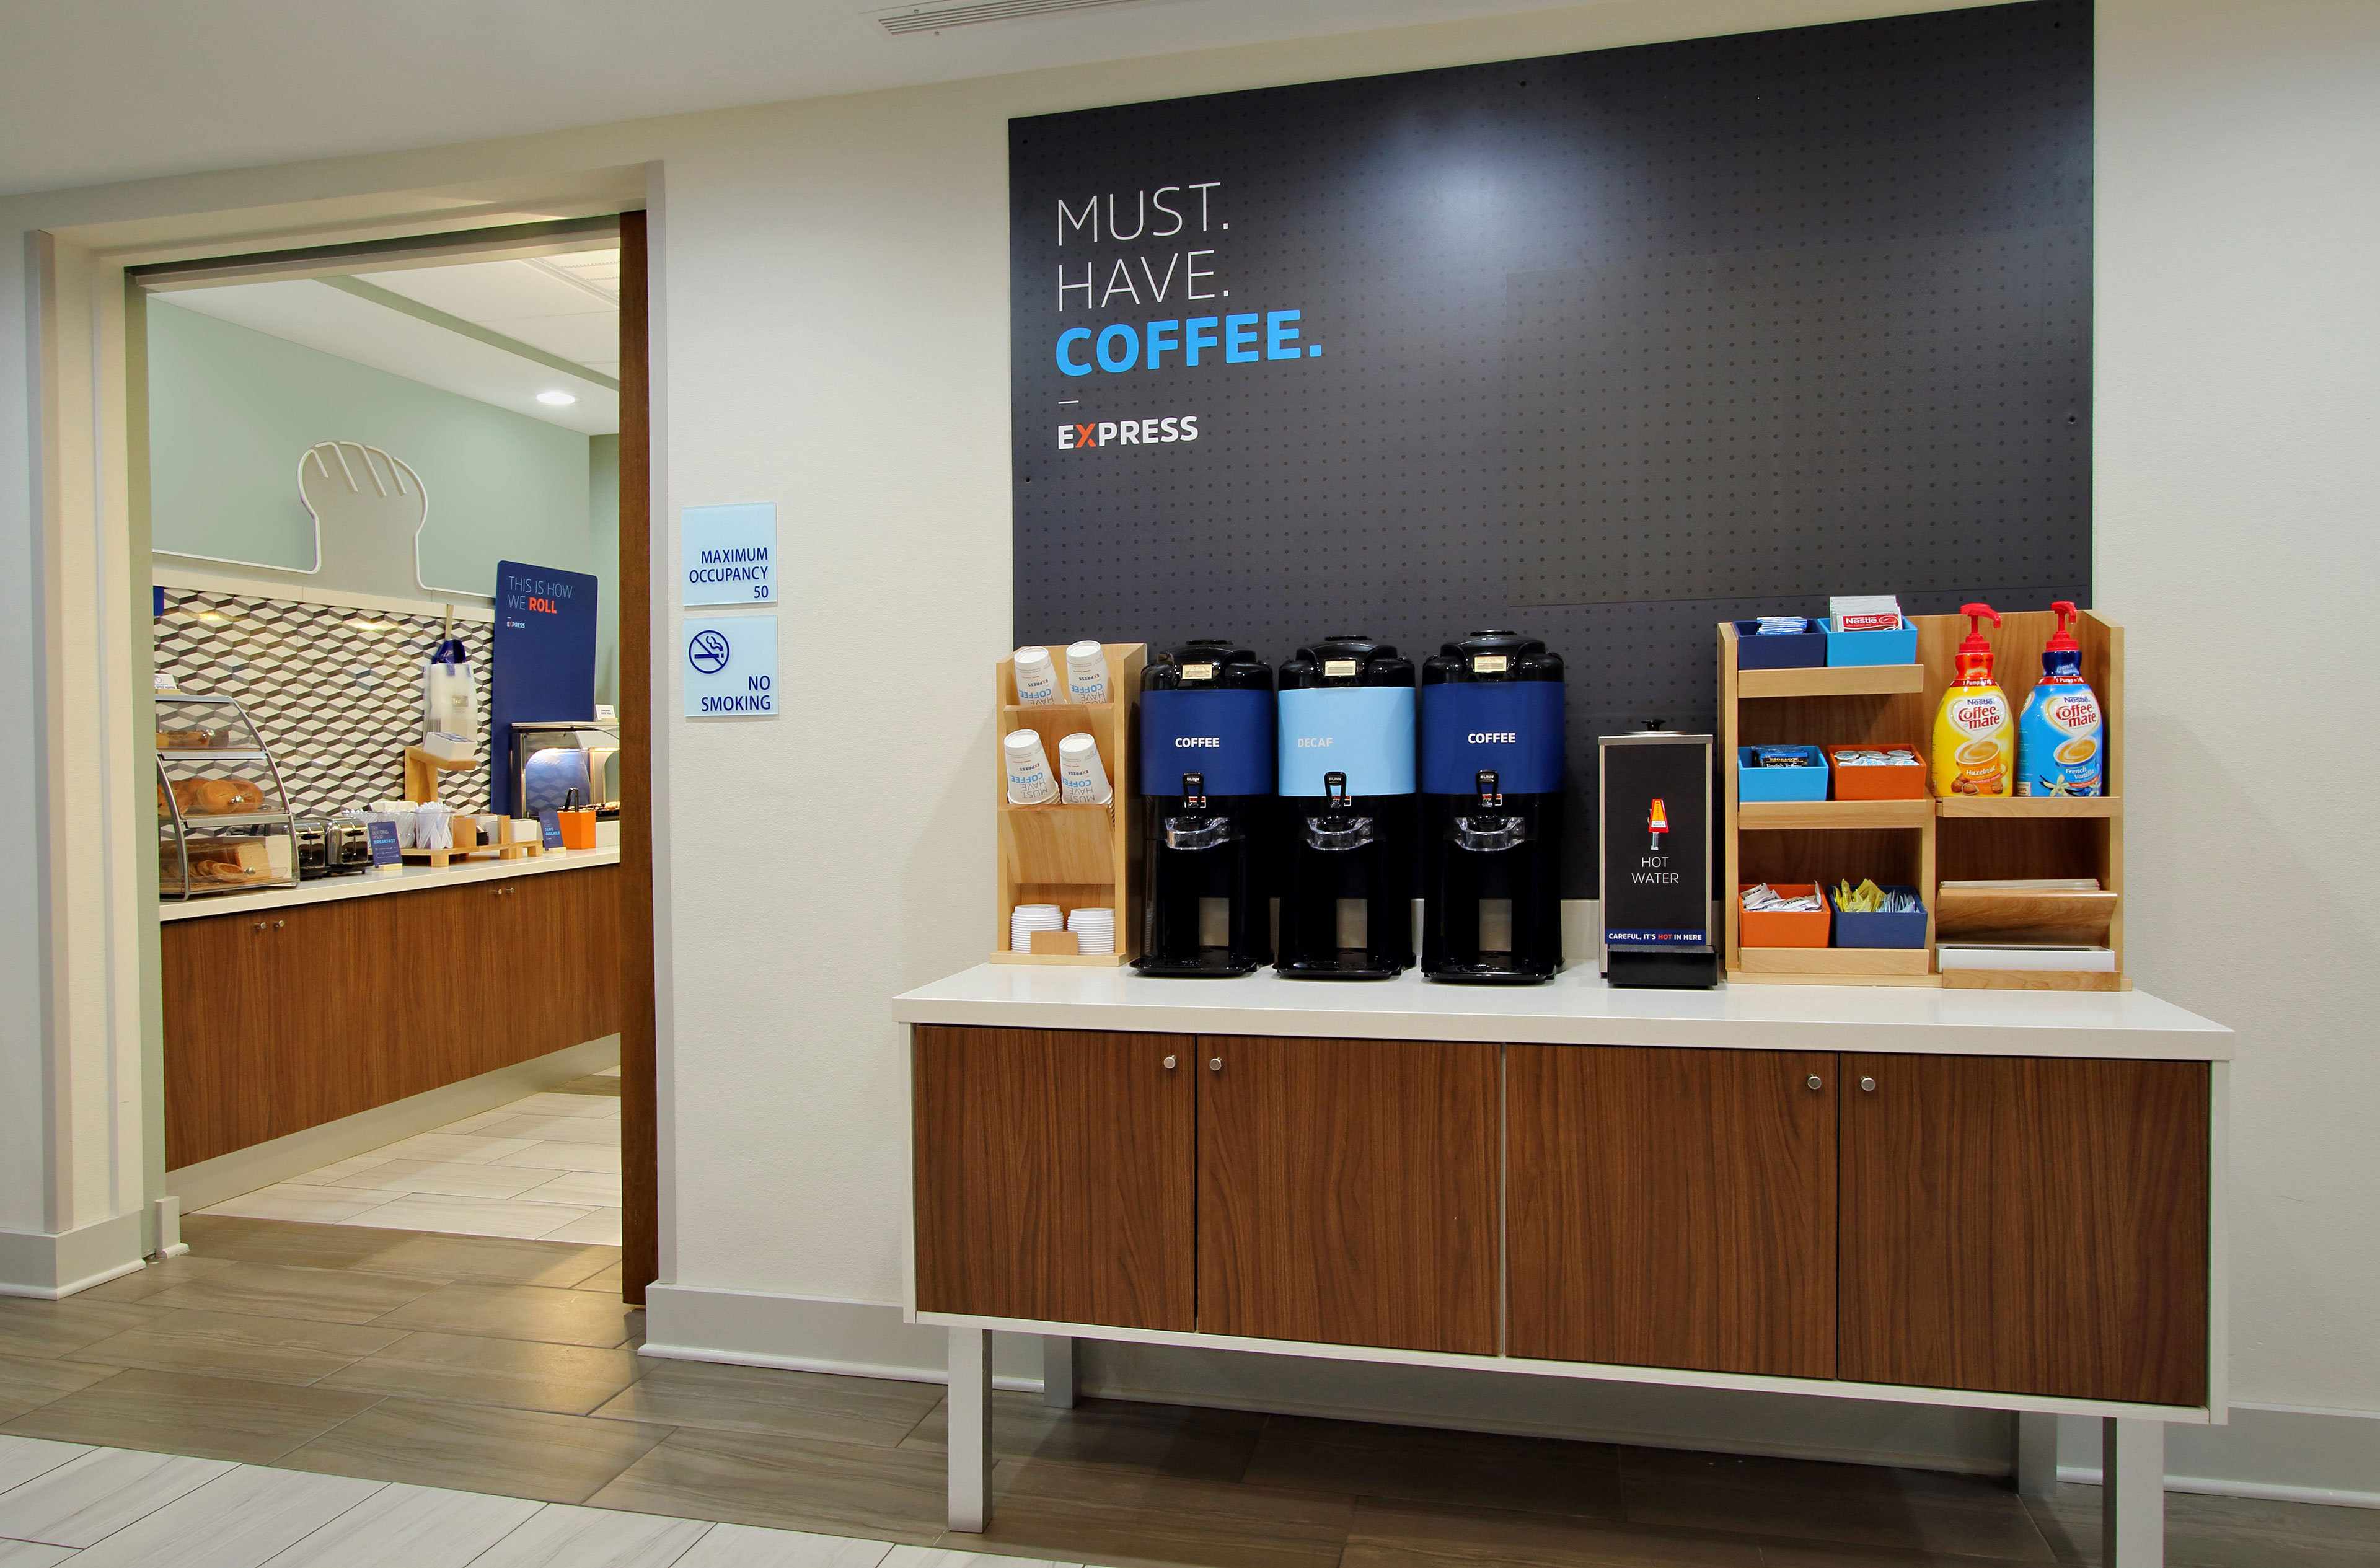 Did you say coffee? Don't forget to take a complimentary cup to go